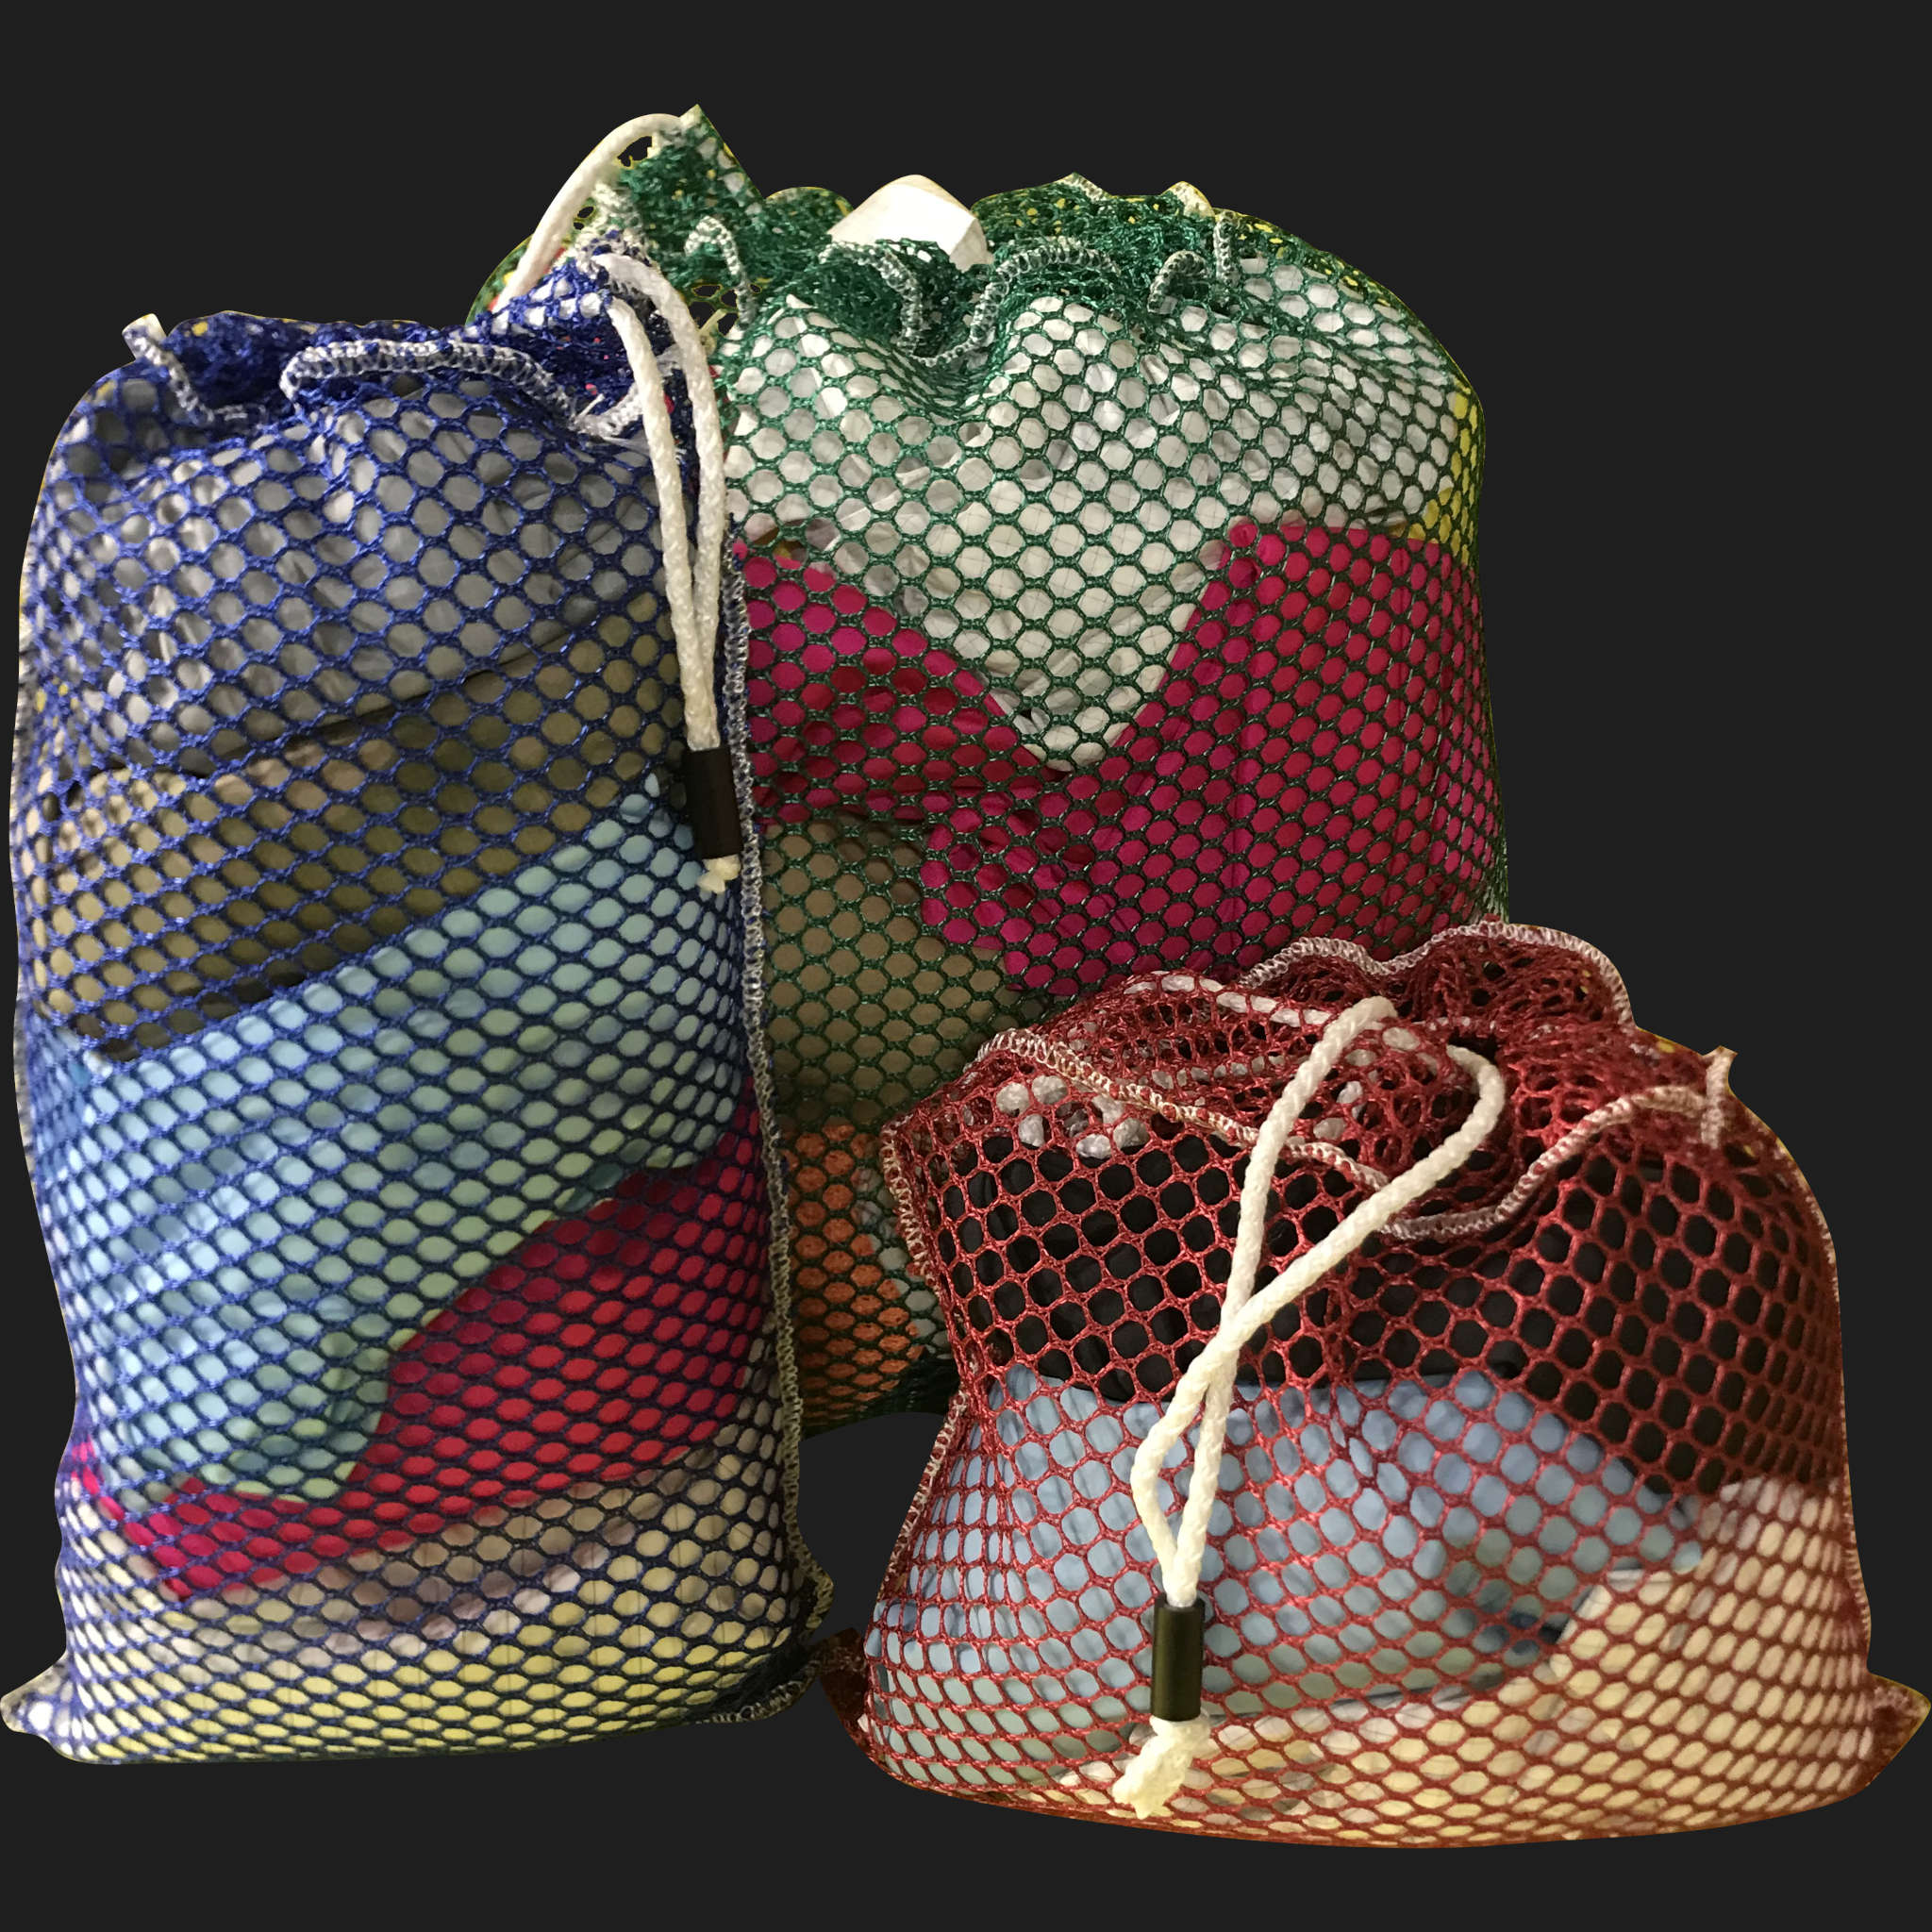 24" x 40" Customized Mesh-Net-Laundry Bags Heavy Duty with Cord and barrellock closure